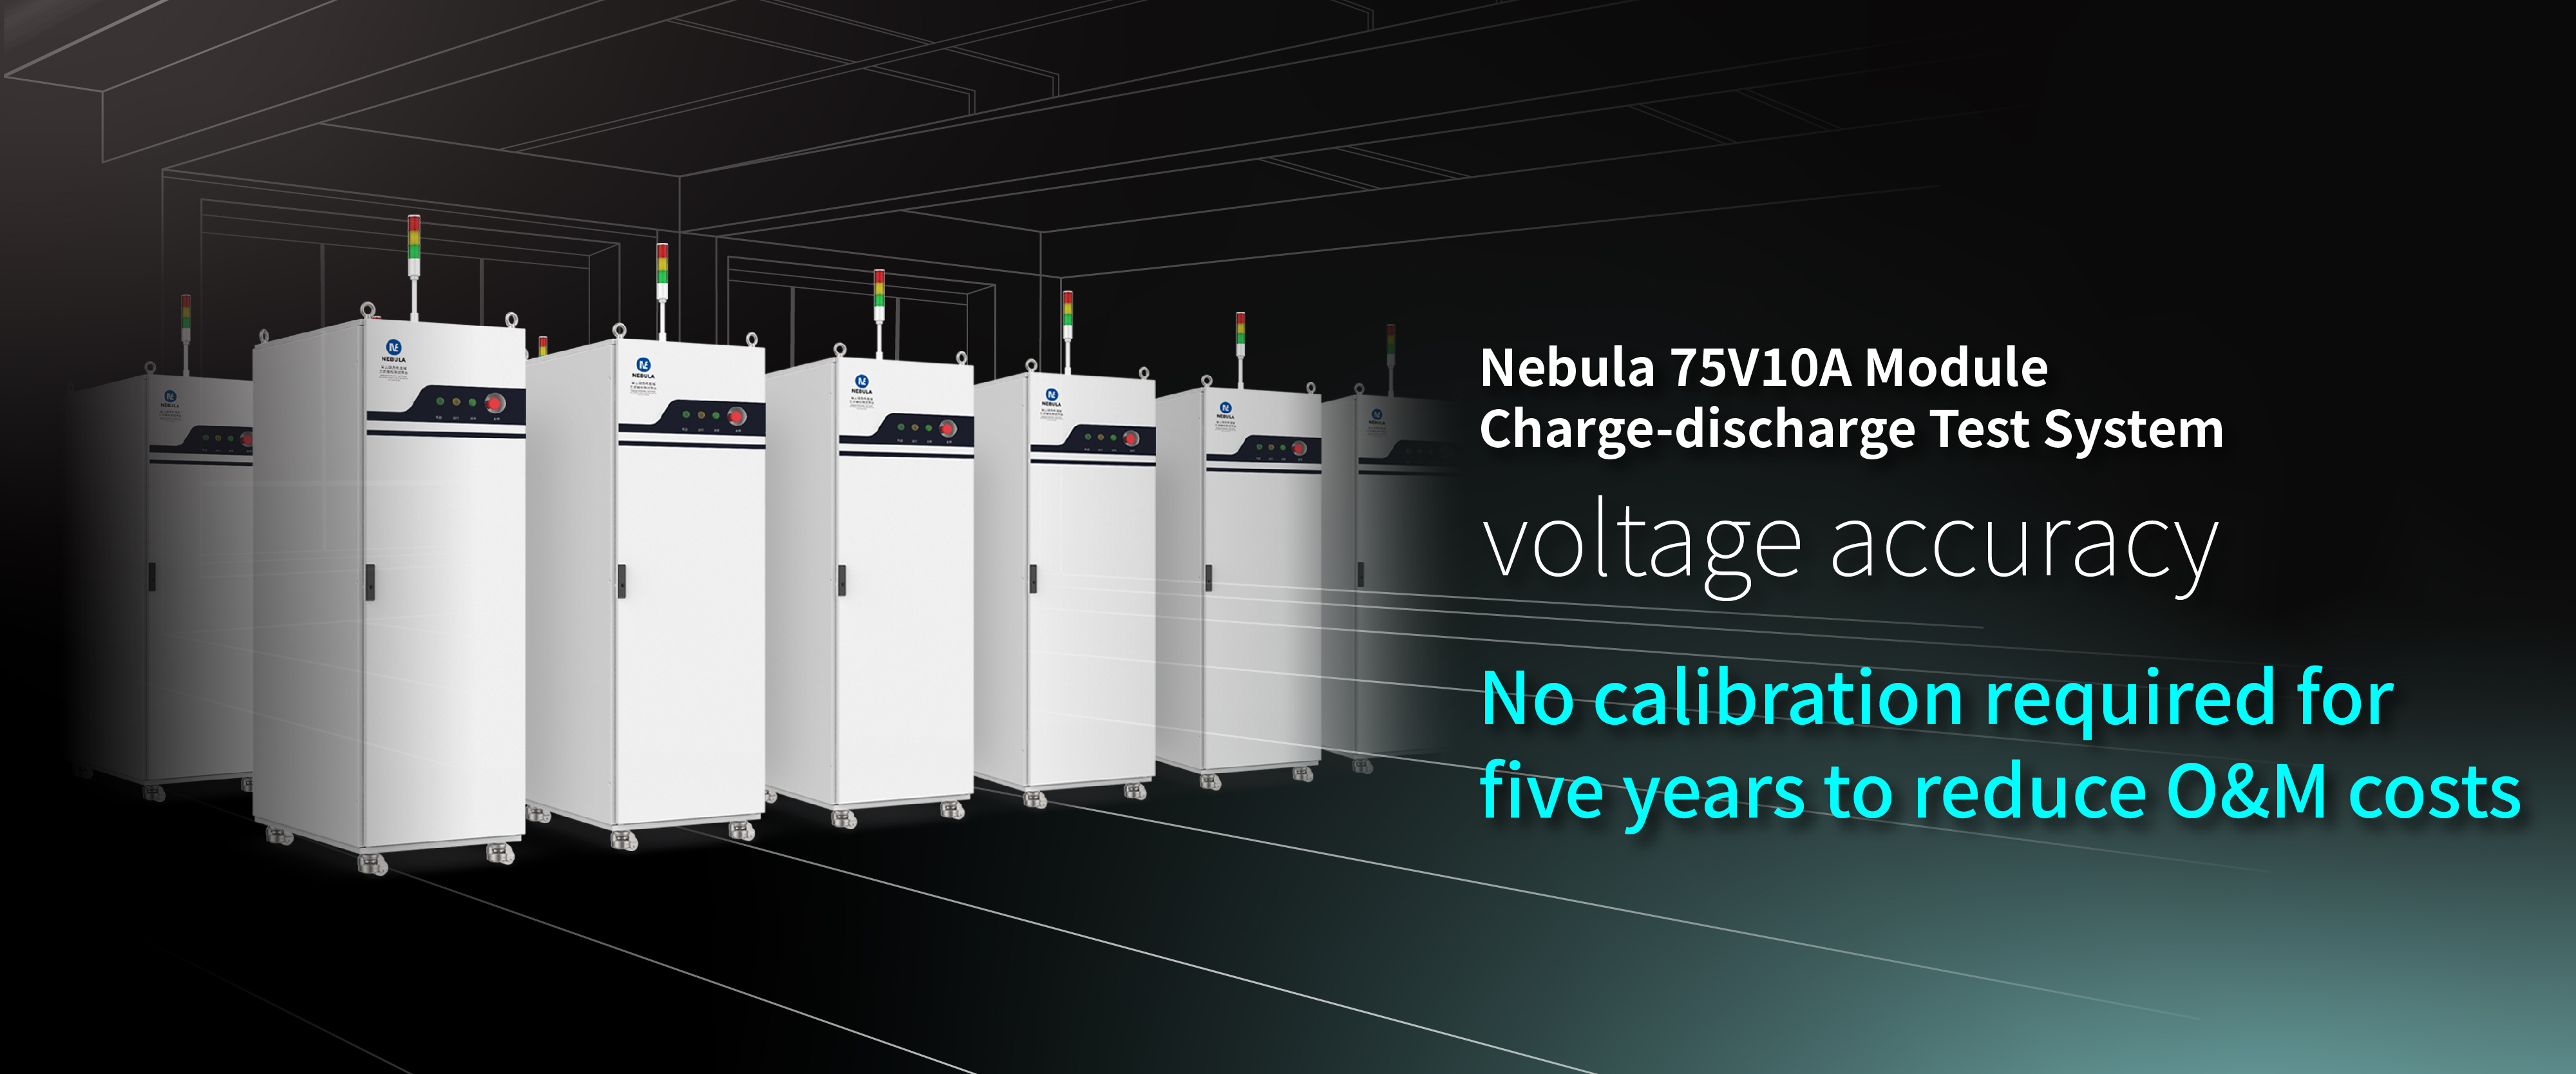 Nebula 75V10A Module Charge-discharge Test System